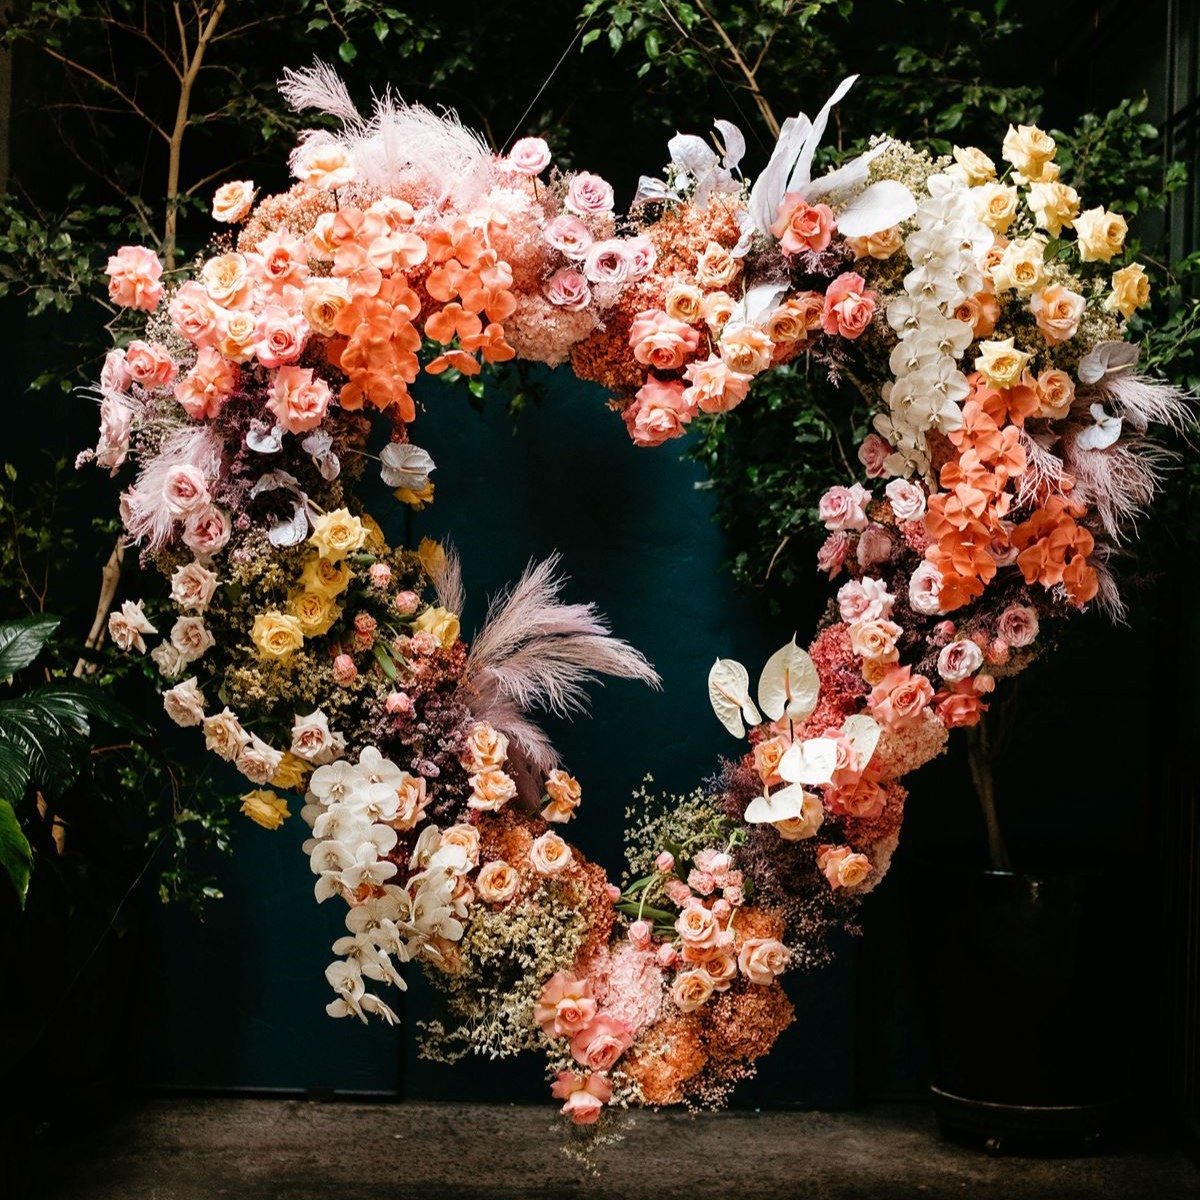 Dreamy wedding ceremony backdrops to inspire your day